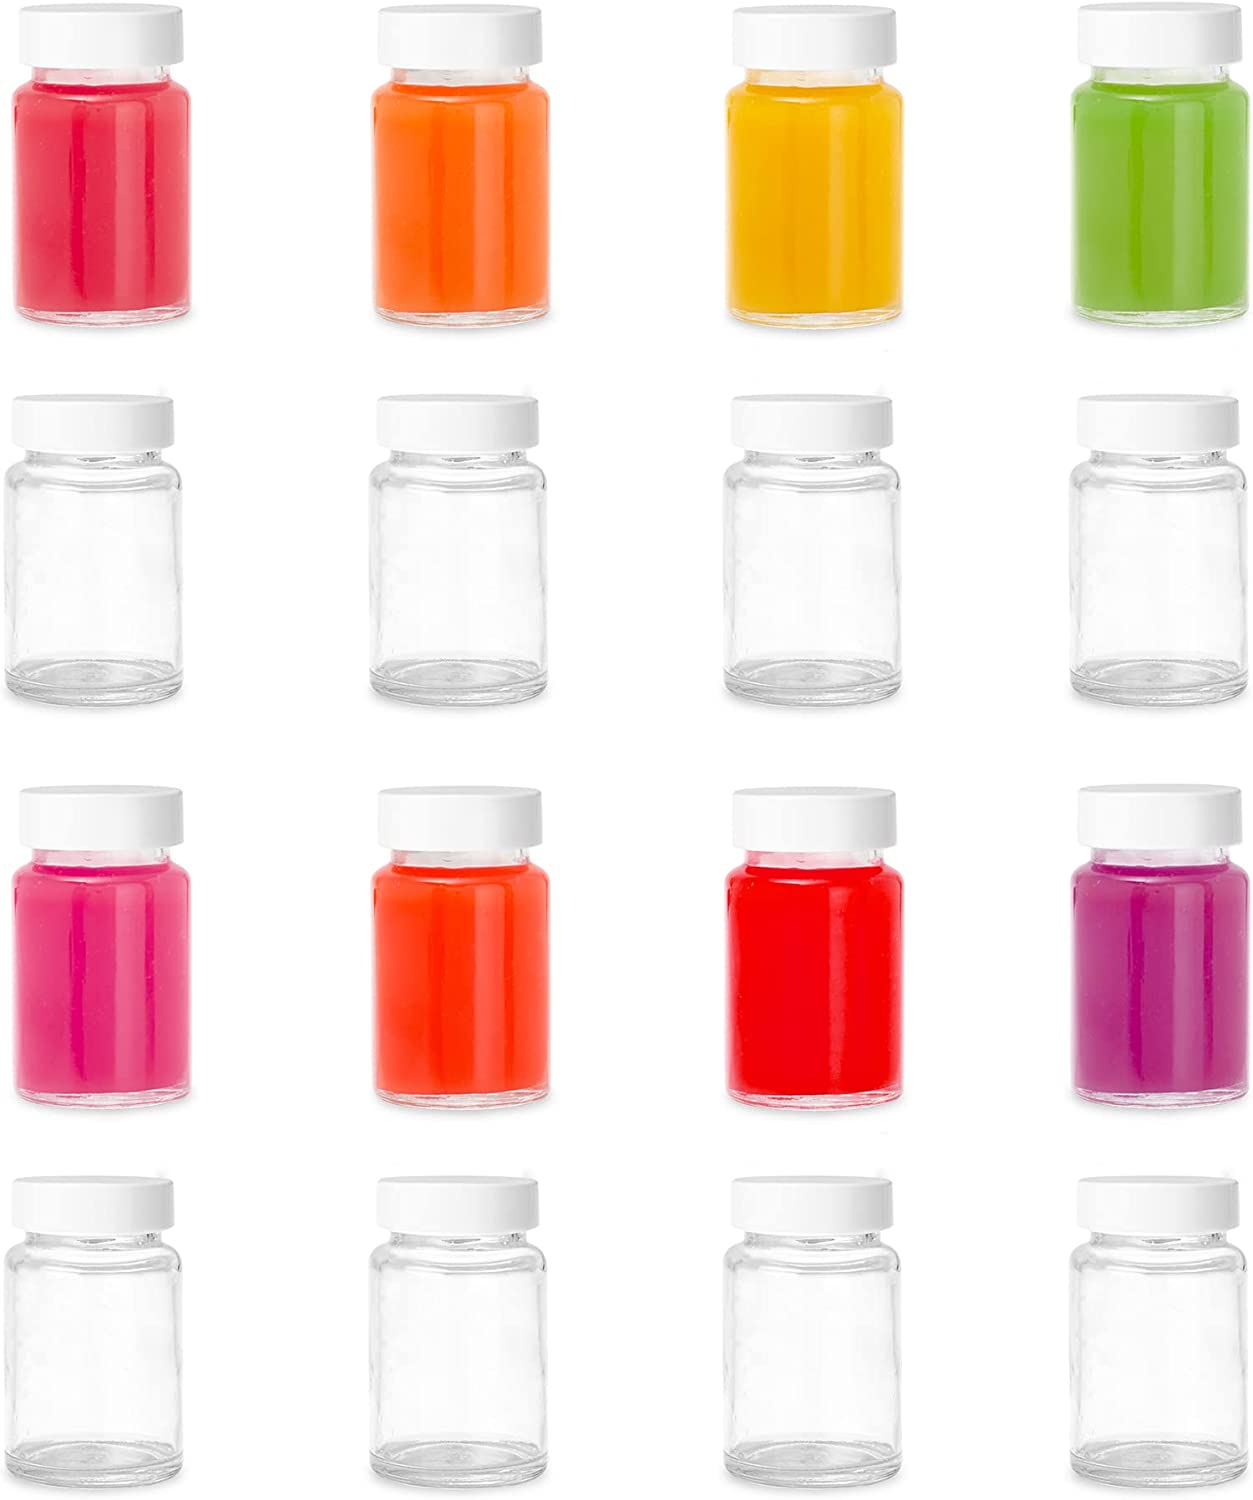 Ilyapa Glass Juice Shot Bottles Pack of 16 - 4oz On The Go Beverage Storage Container with White Cap, Reusable, Leak Proof